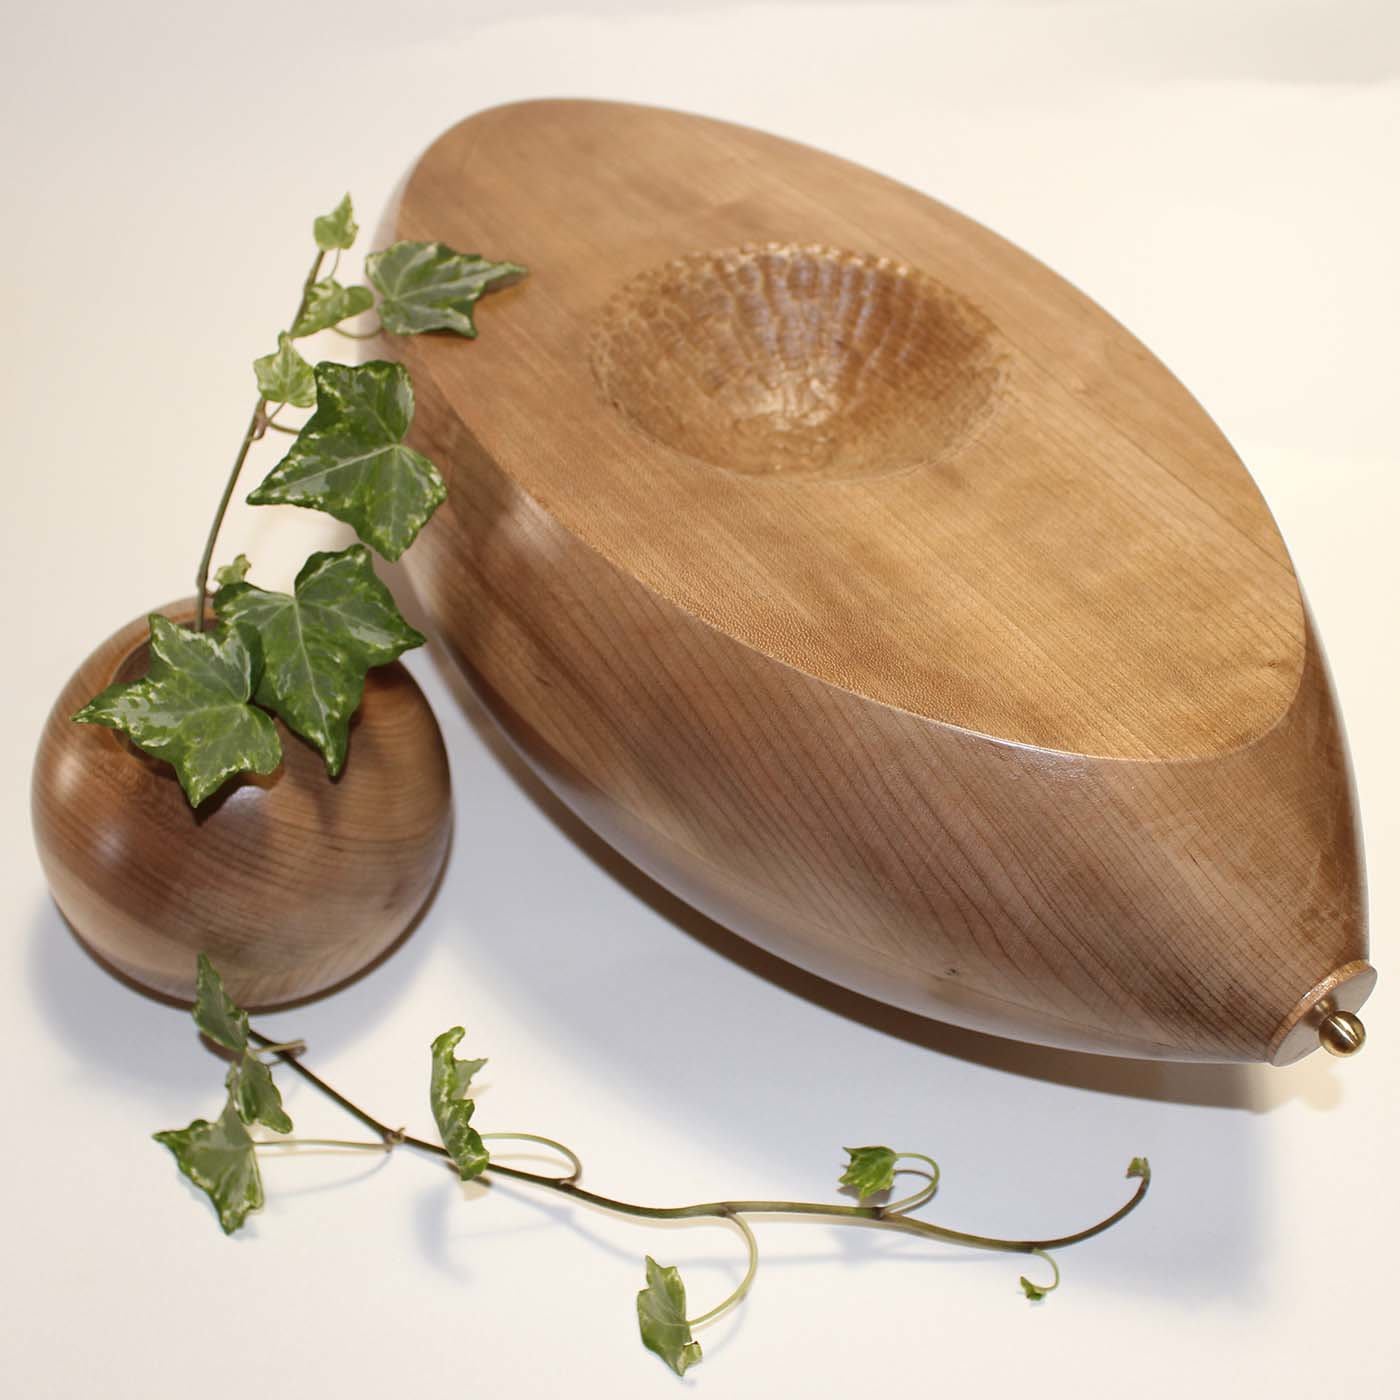 Rugby Sculptural Object - Meccani Design